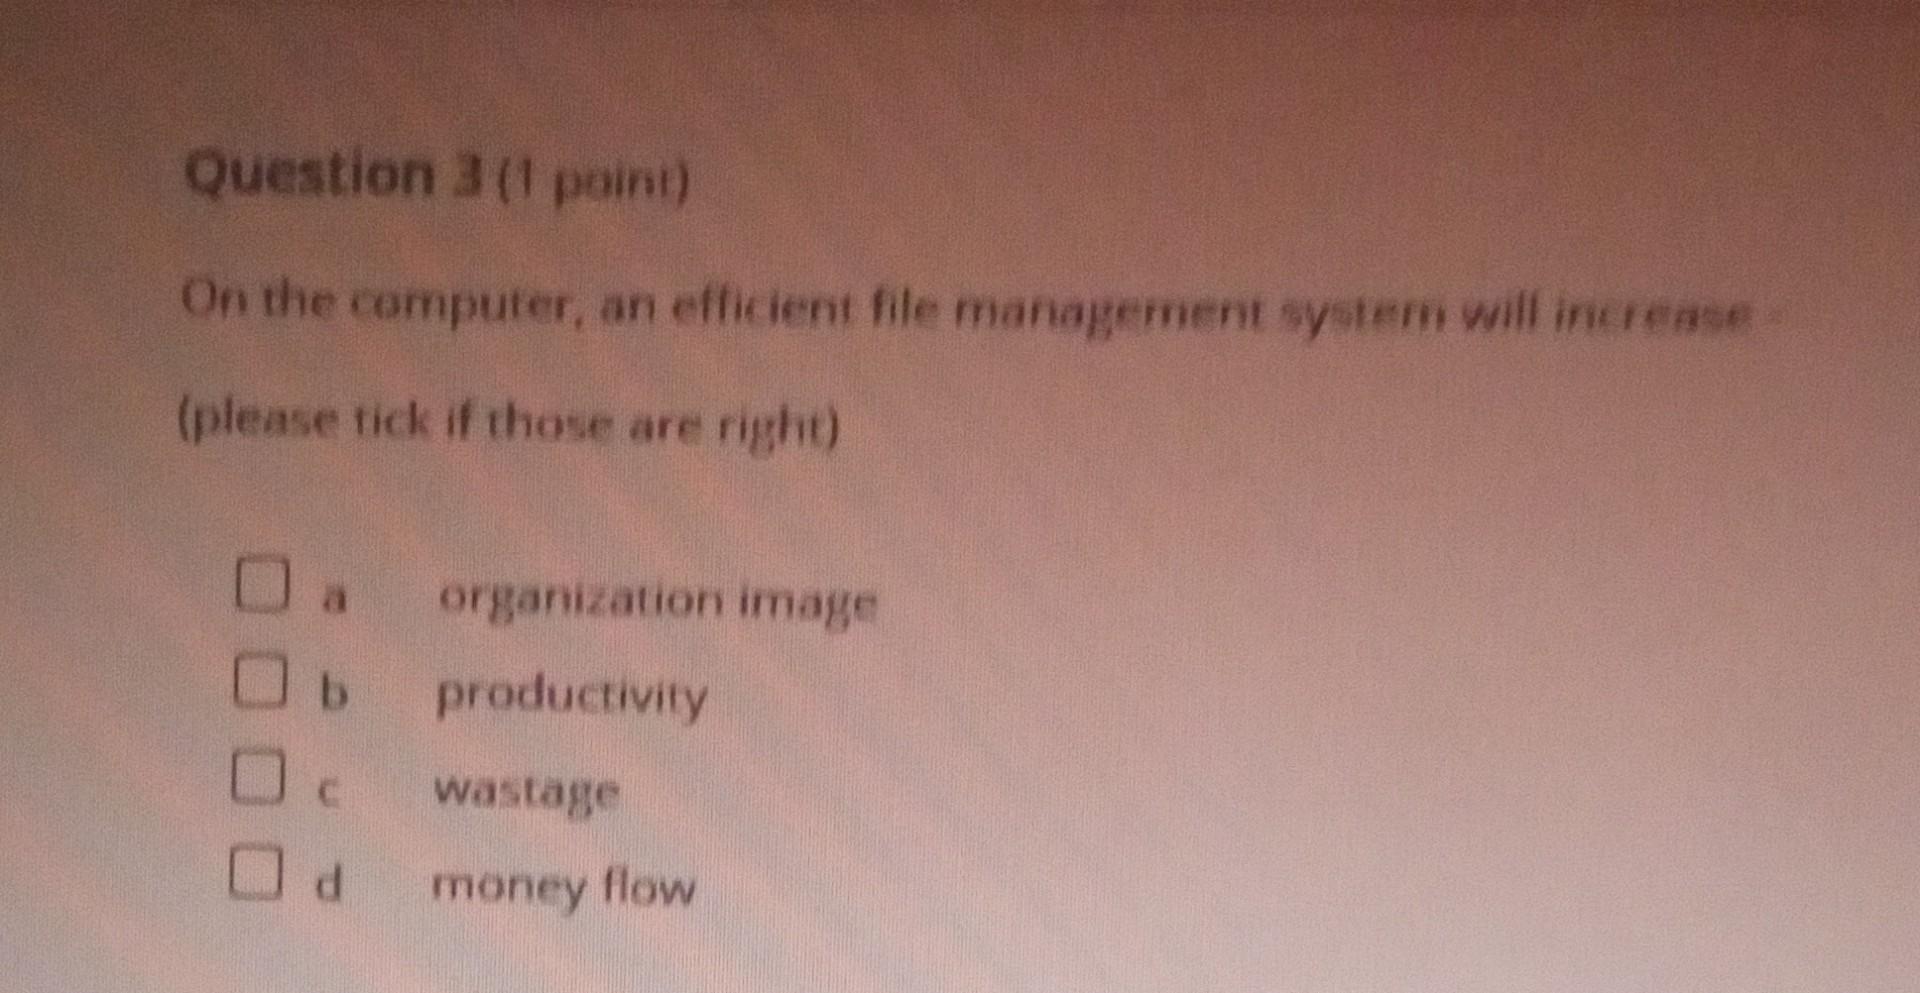 On the camputer, an efficient file management system will inctease (please tick if those are right)
a organization image
b pr